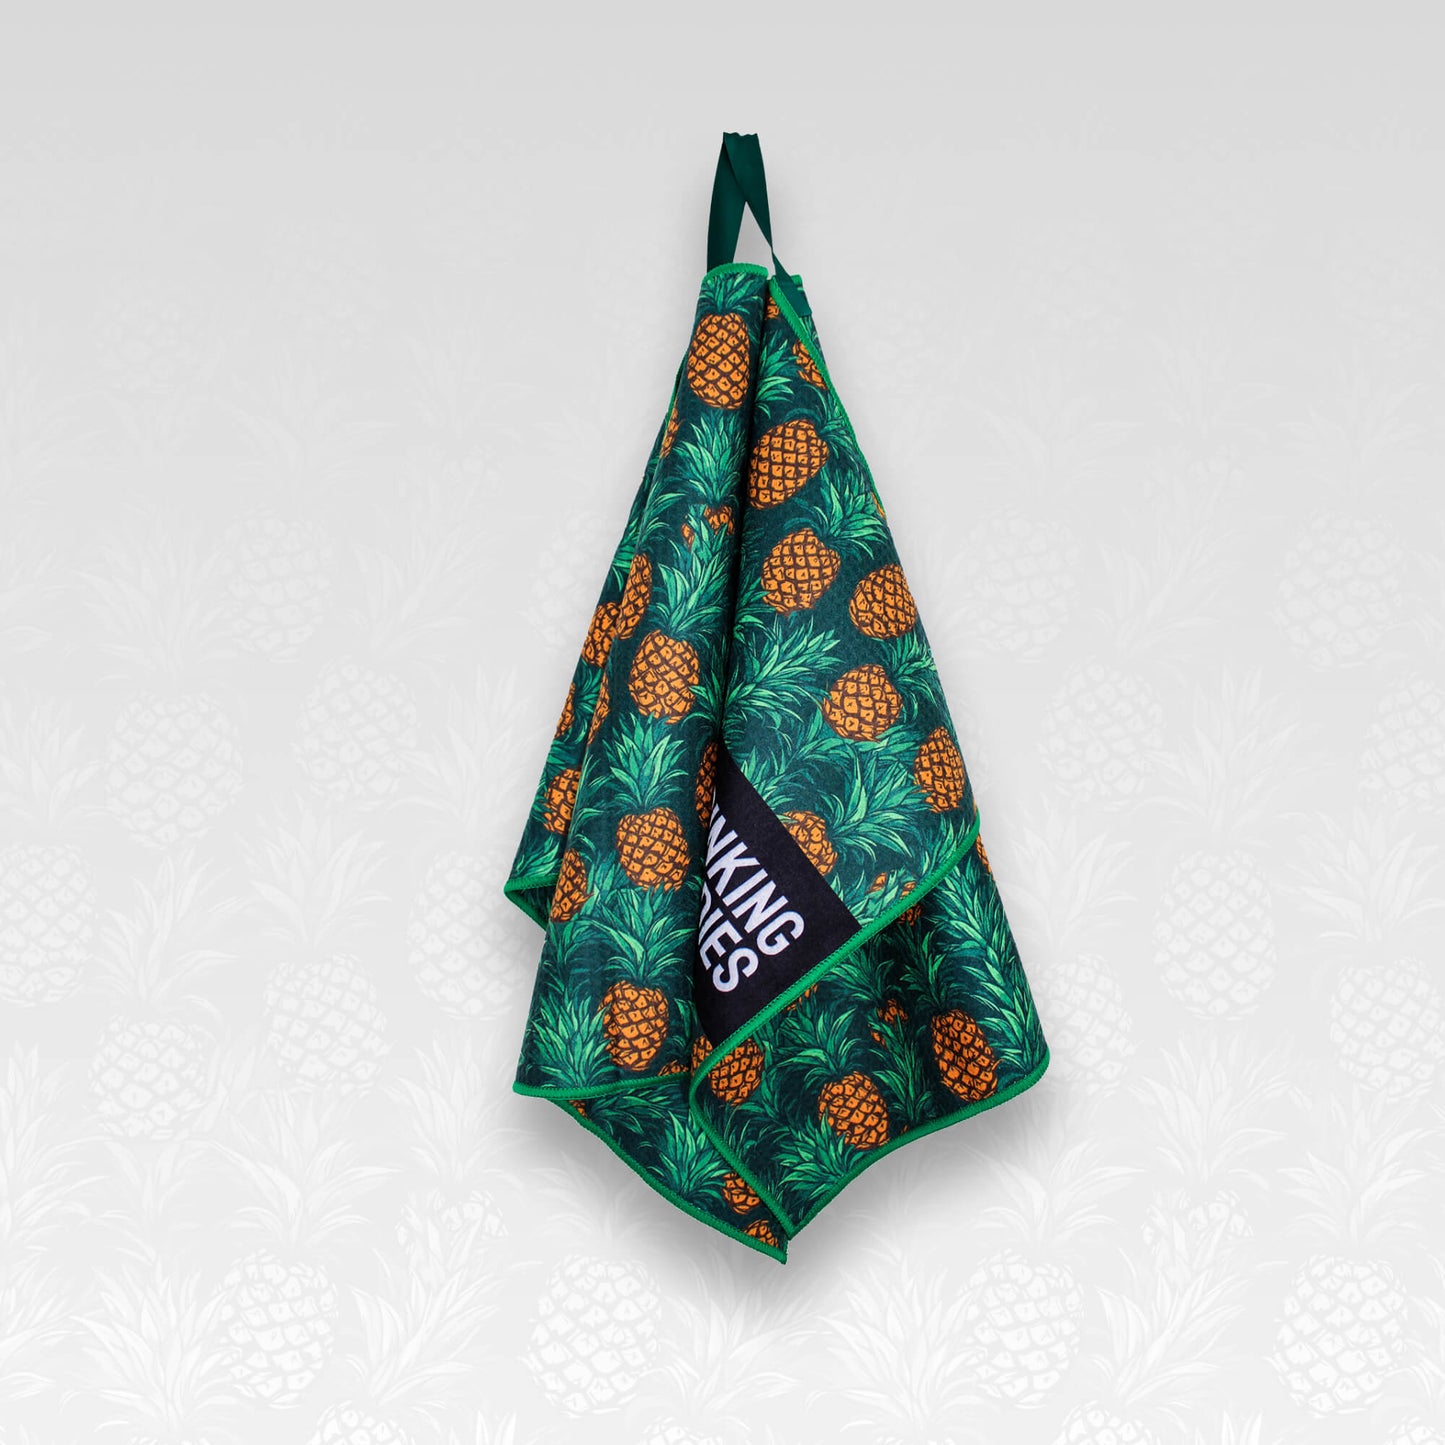 A hanging pineapple patterned microfibre golf towel